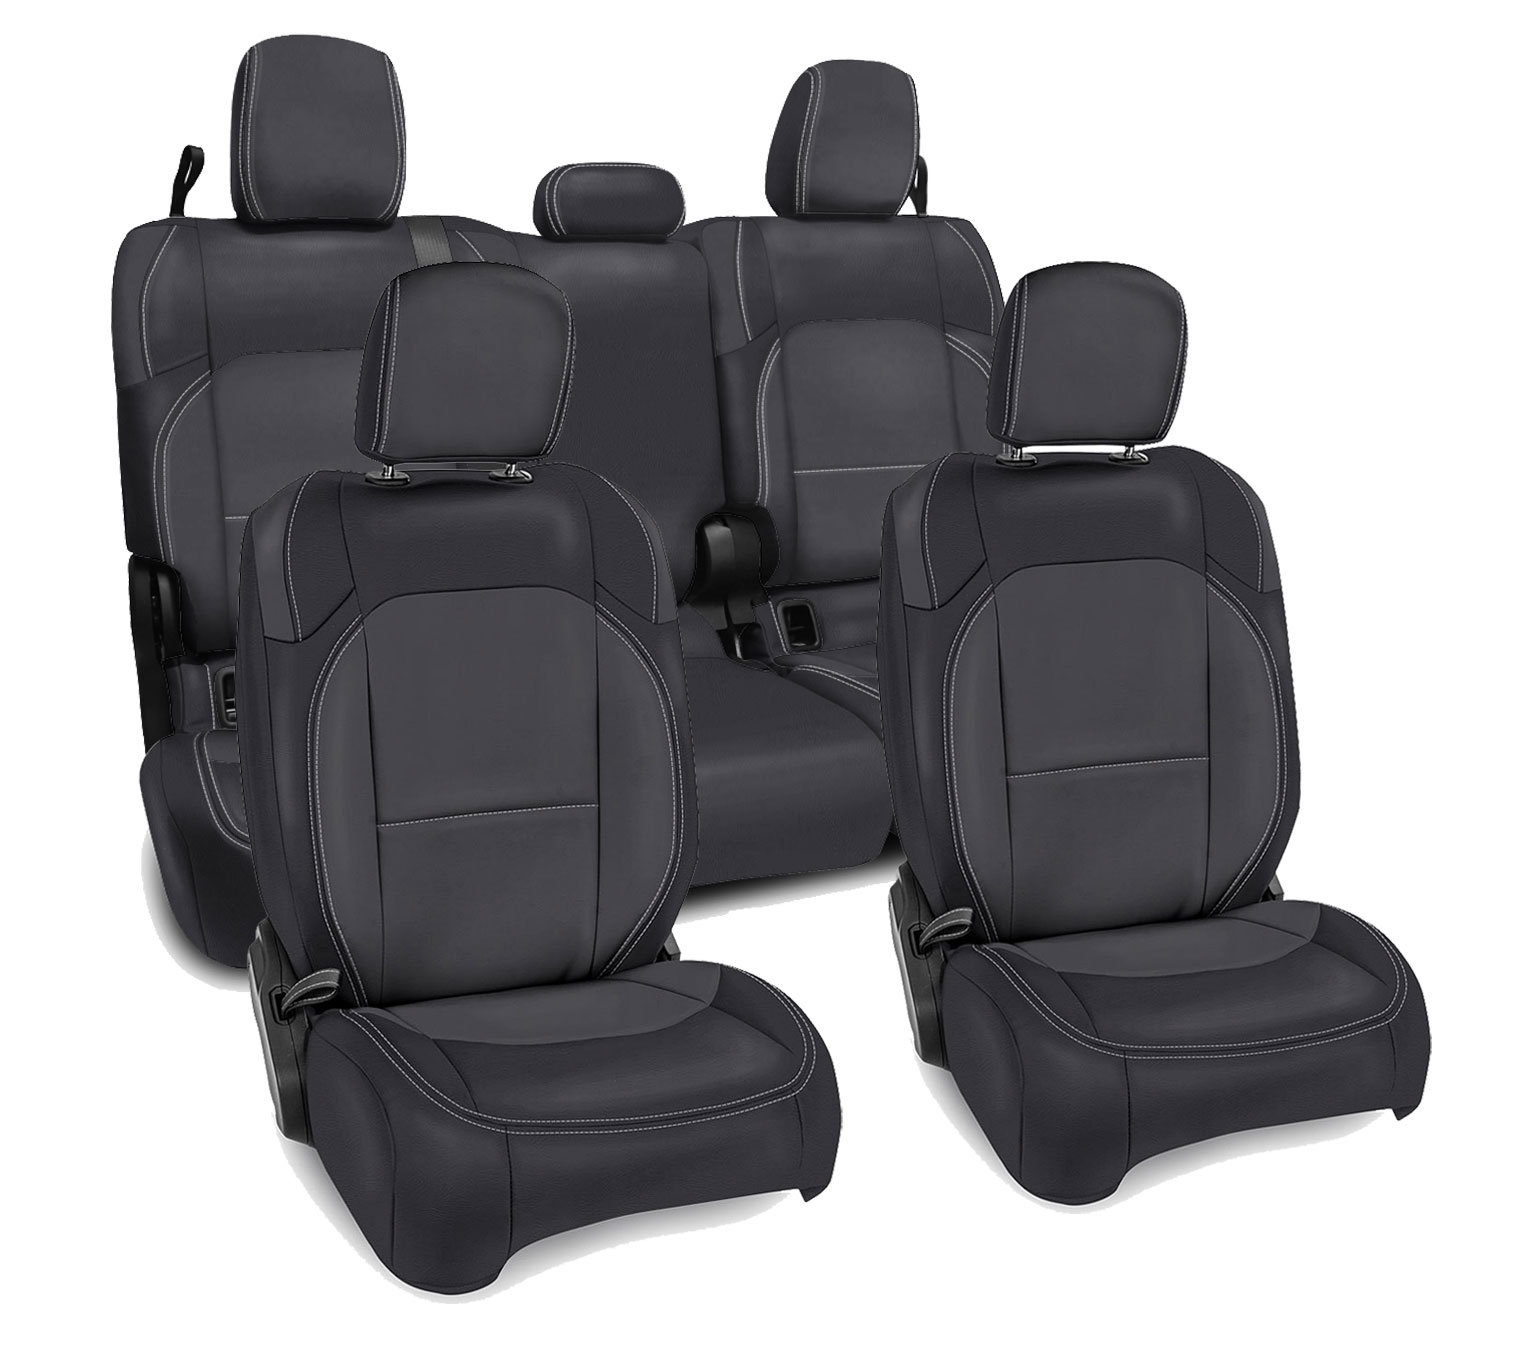 23 Colors 1998 1999 2000 2001 2002 2003 2004 2005 2-Door Complete Back Bench Full Set: Front & Rear Totally Covers Fits 1997-2006 Jeep Wrangler TJ Seat Covers: Black & Tan